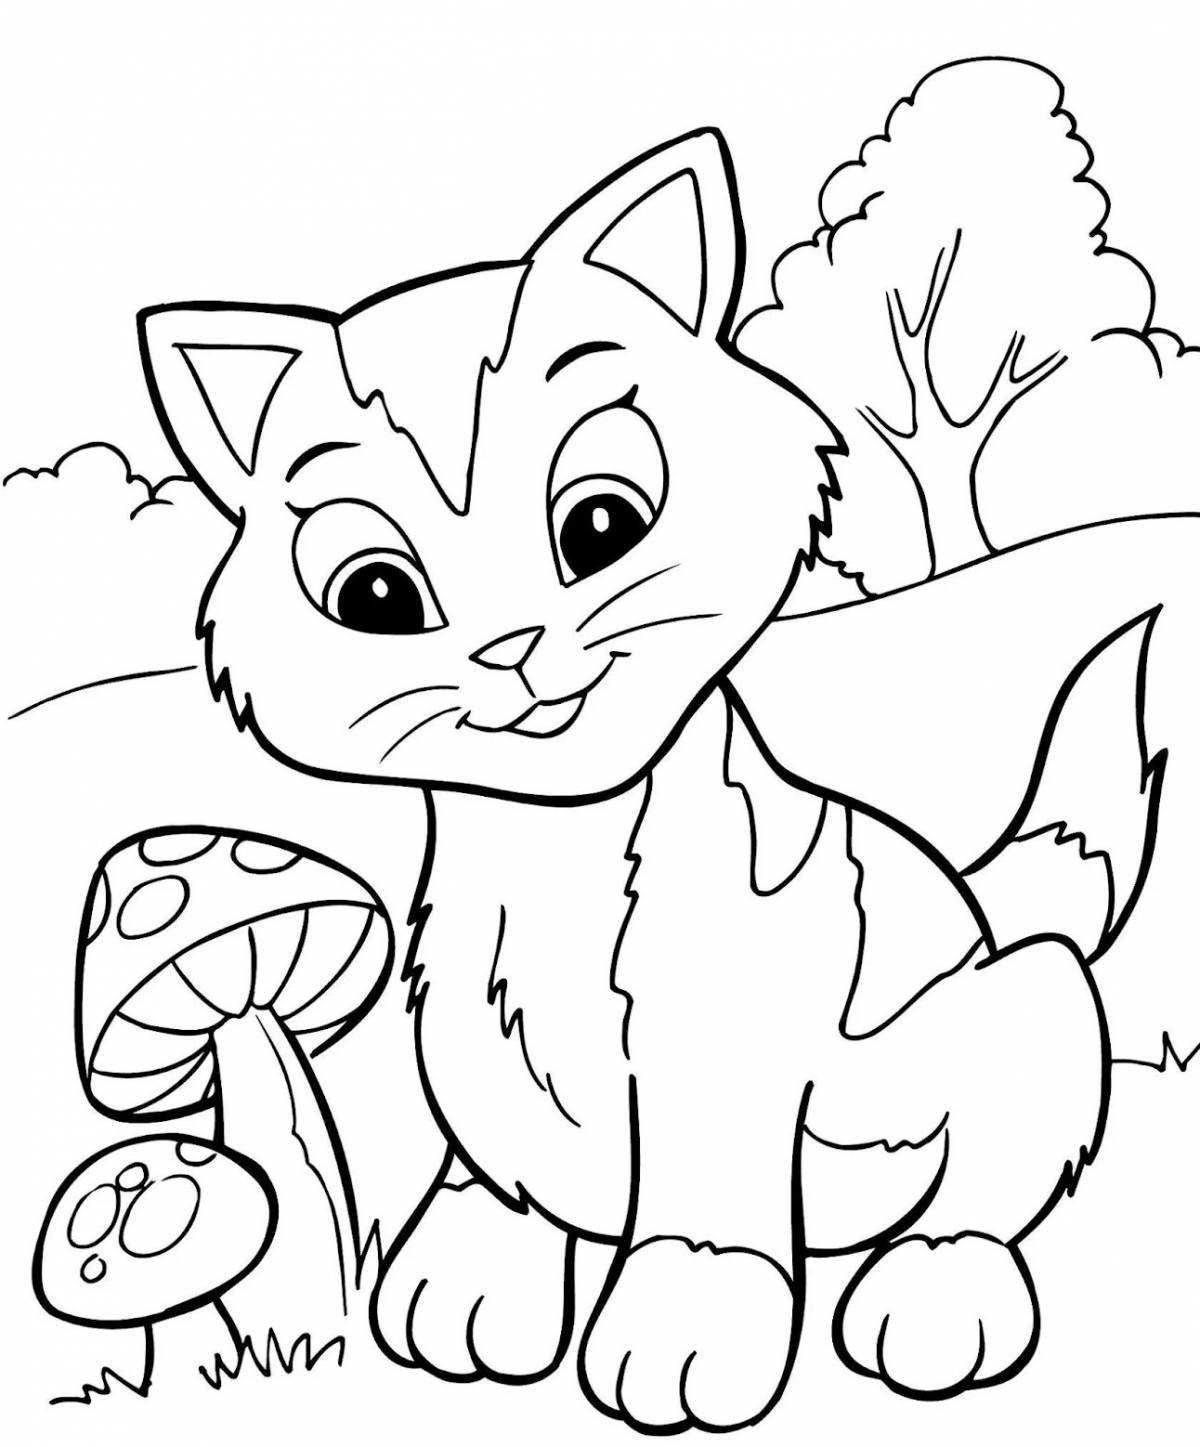 Fancy cat coloring book for kids